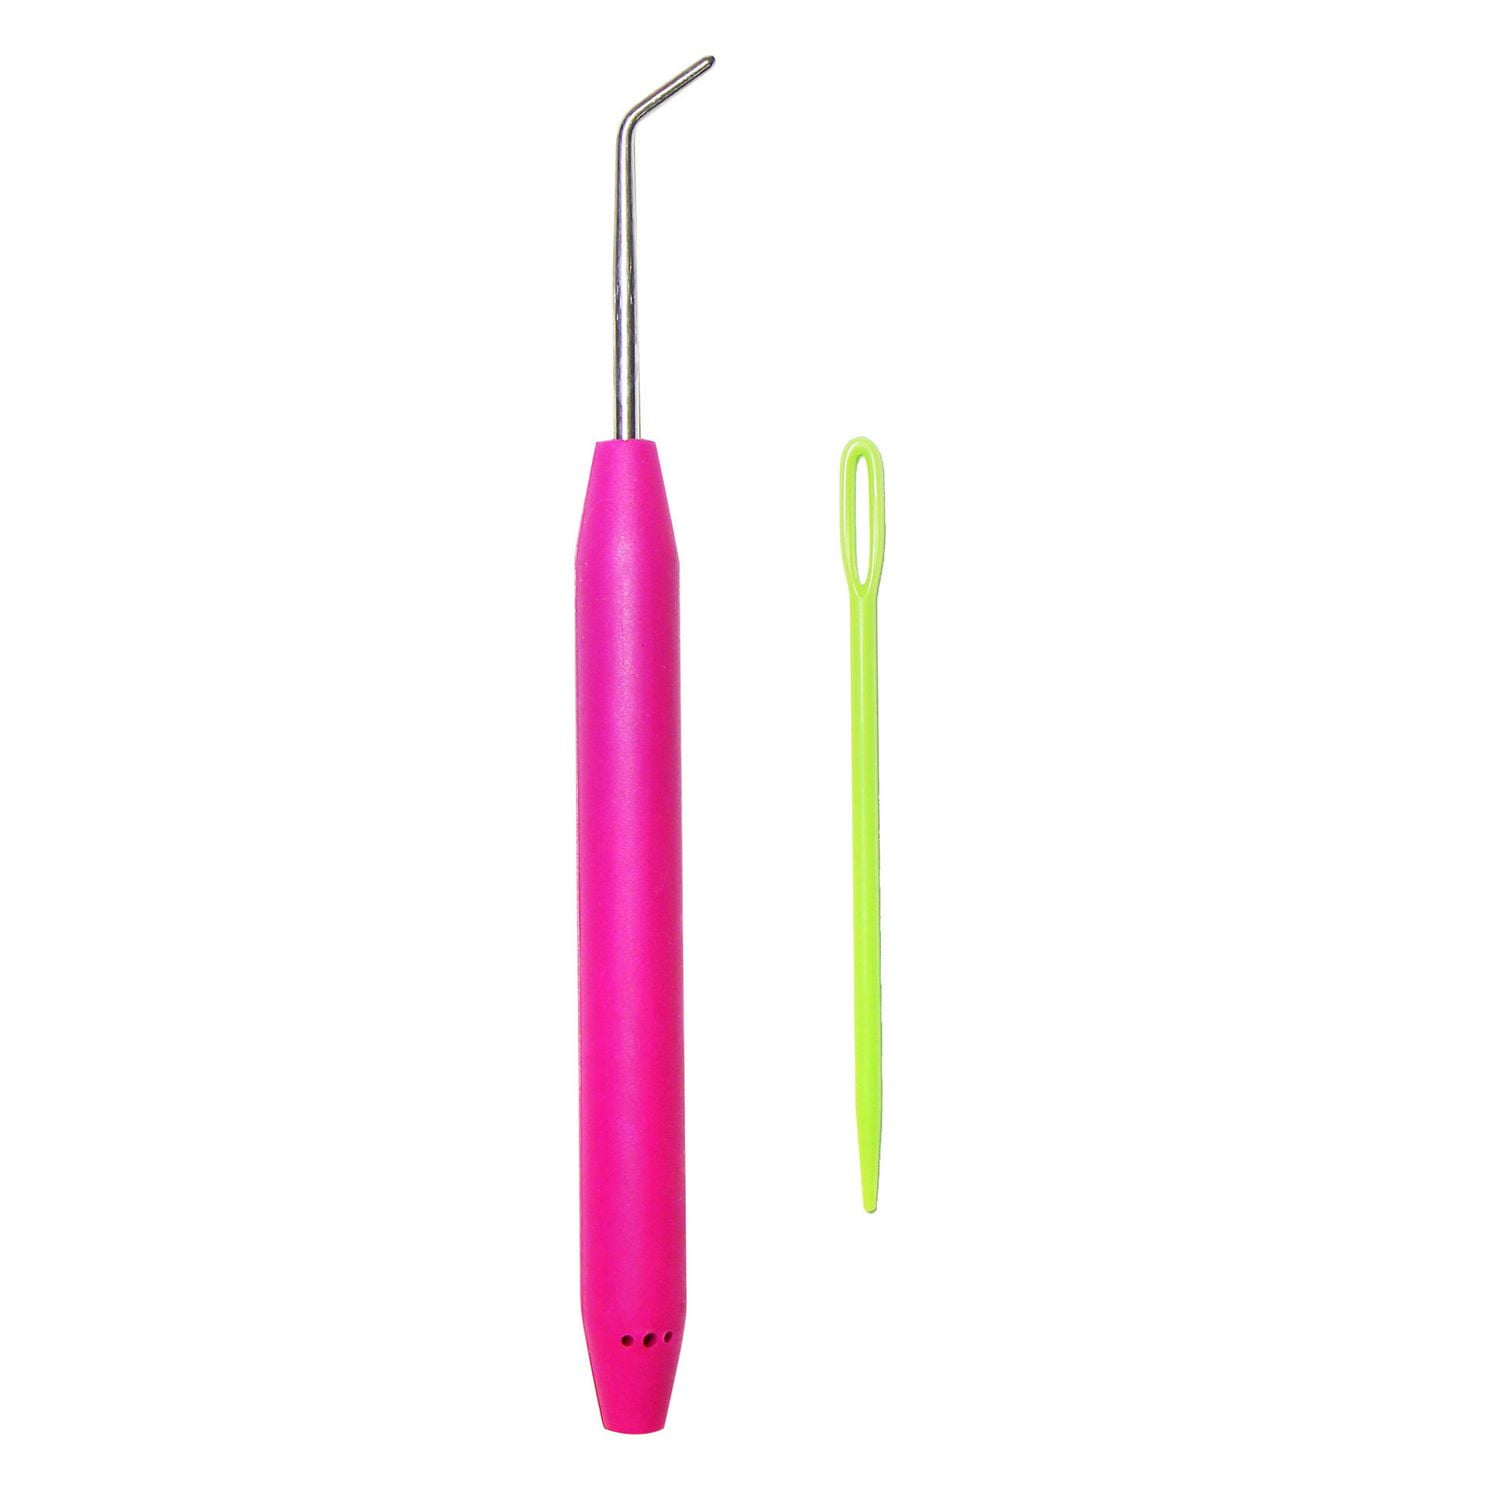 Love Knitting Replacement Needle and Hook for Knitting Loom, 2